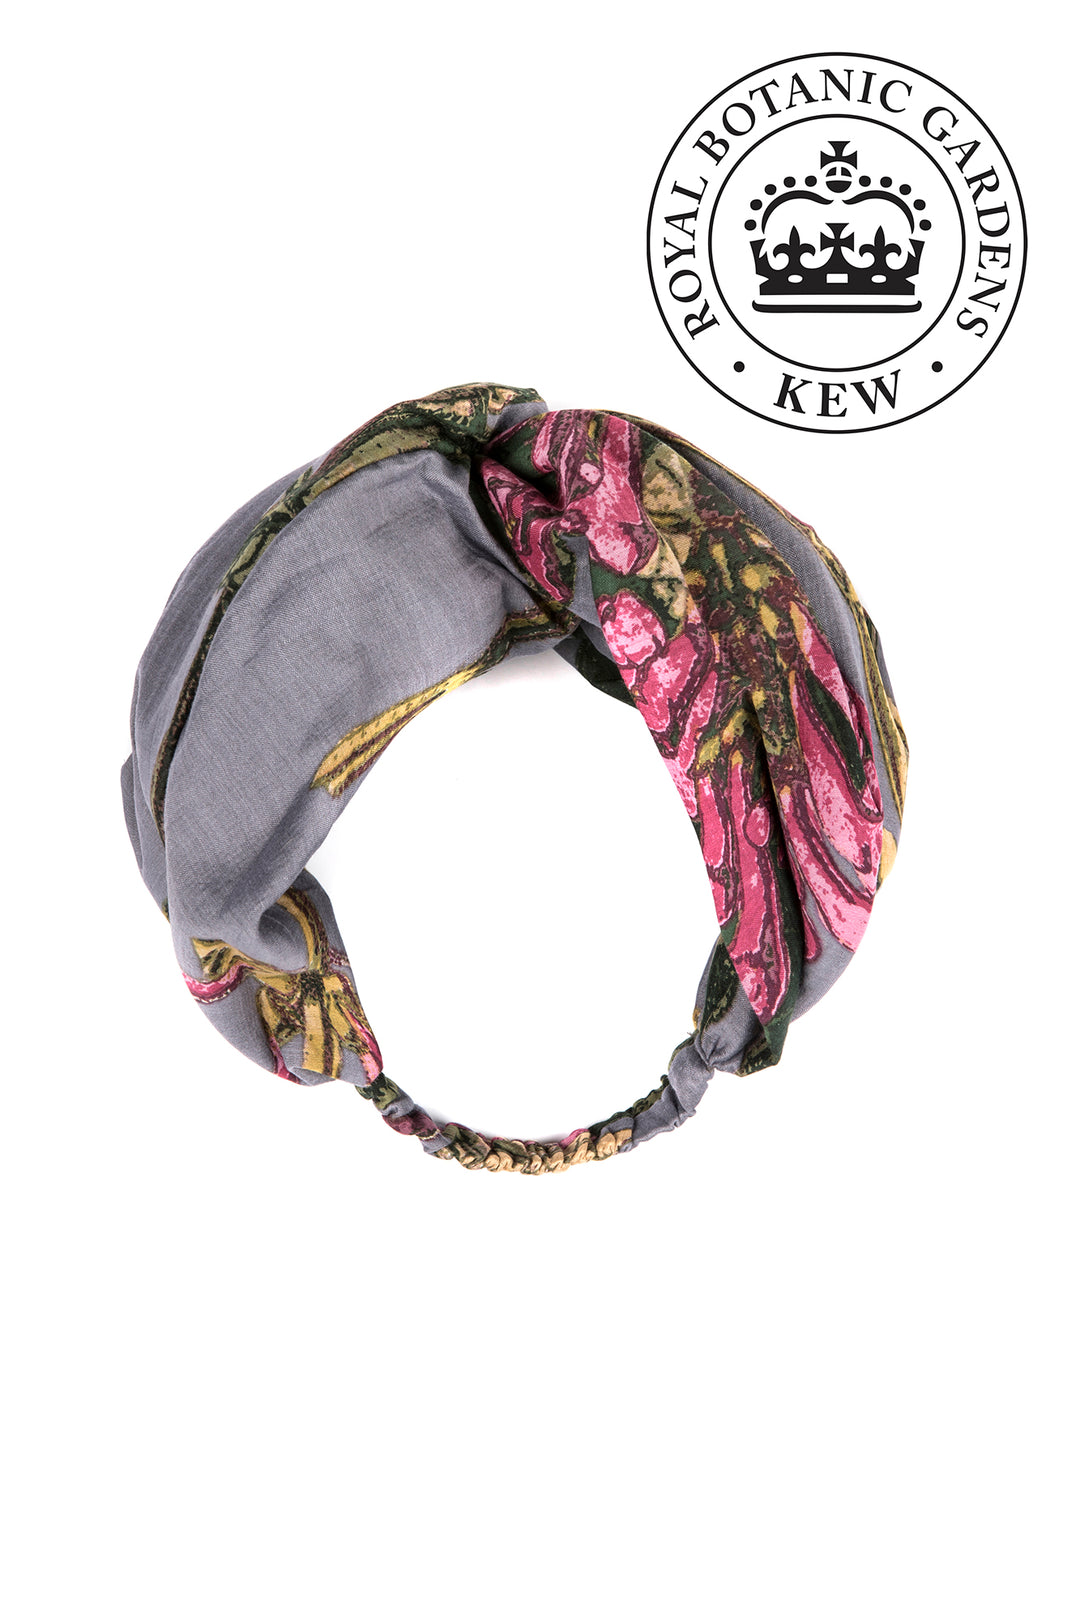 KEW Magnolia Grey Headband- Our headbands are made from 100% recycled material using offcuts from our clothing production.